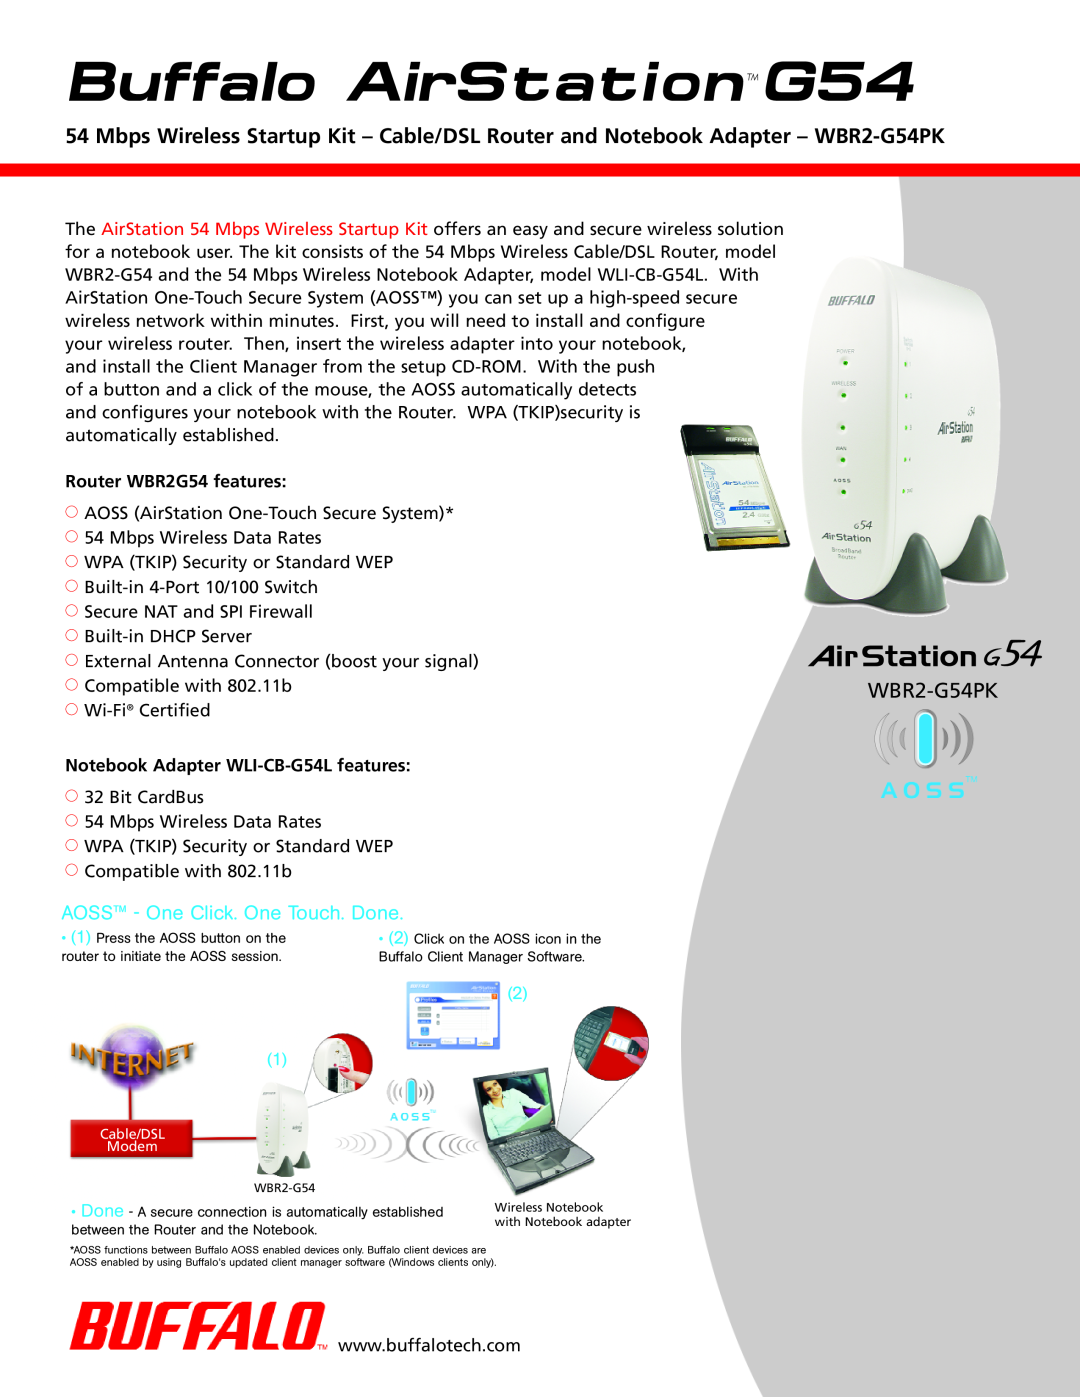 Buffalo Technology WBR2-G54PK manual Buffalo AirStationG54, AOSS - One Click. One Touch. Done, Router WBR2G54 features 